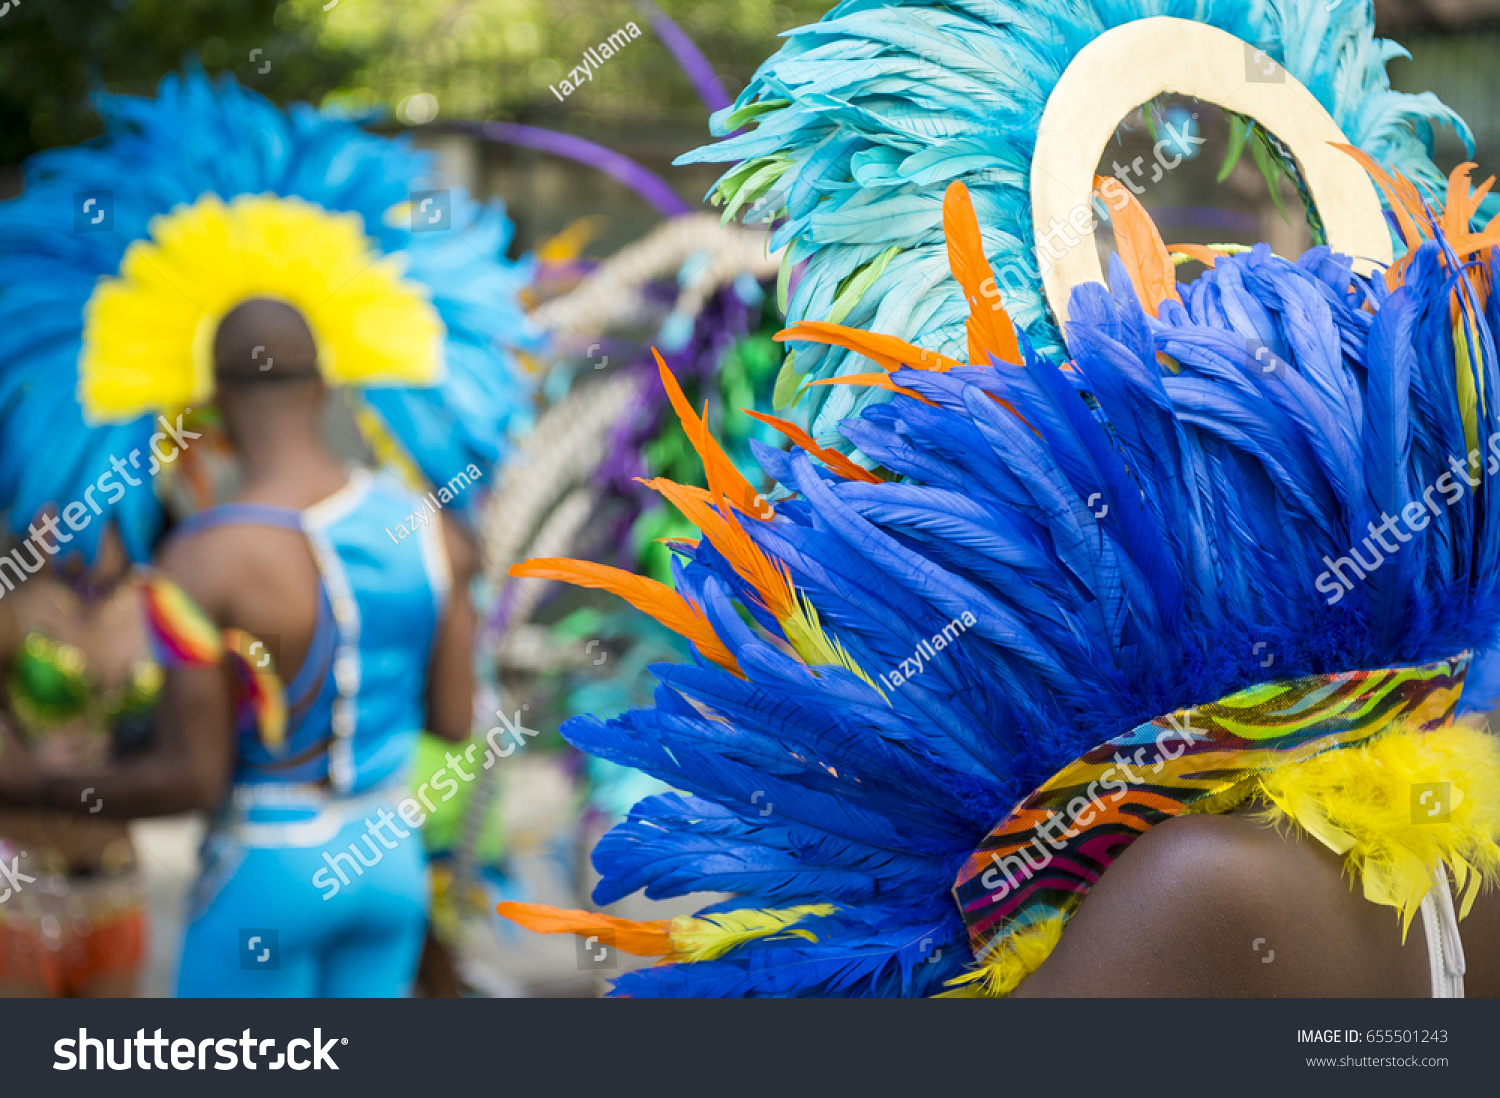 Group of dancers wearing colorful feathers costumes gathered for a gay pride street parade #655501243